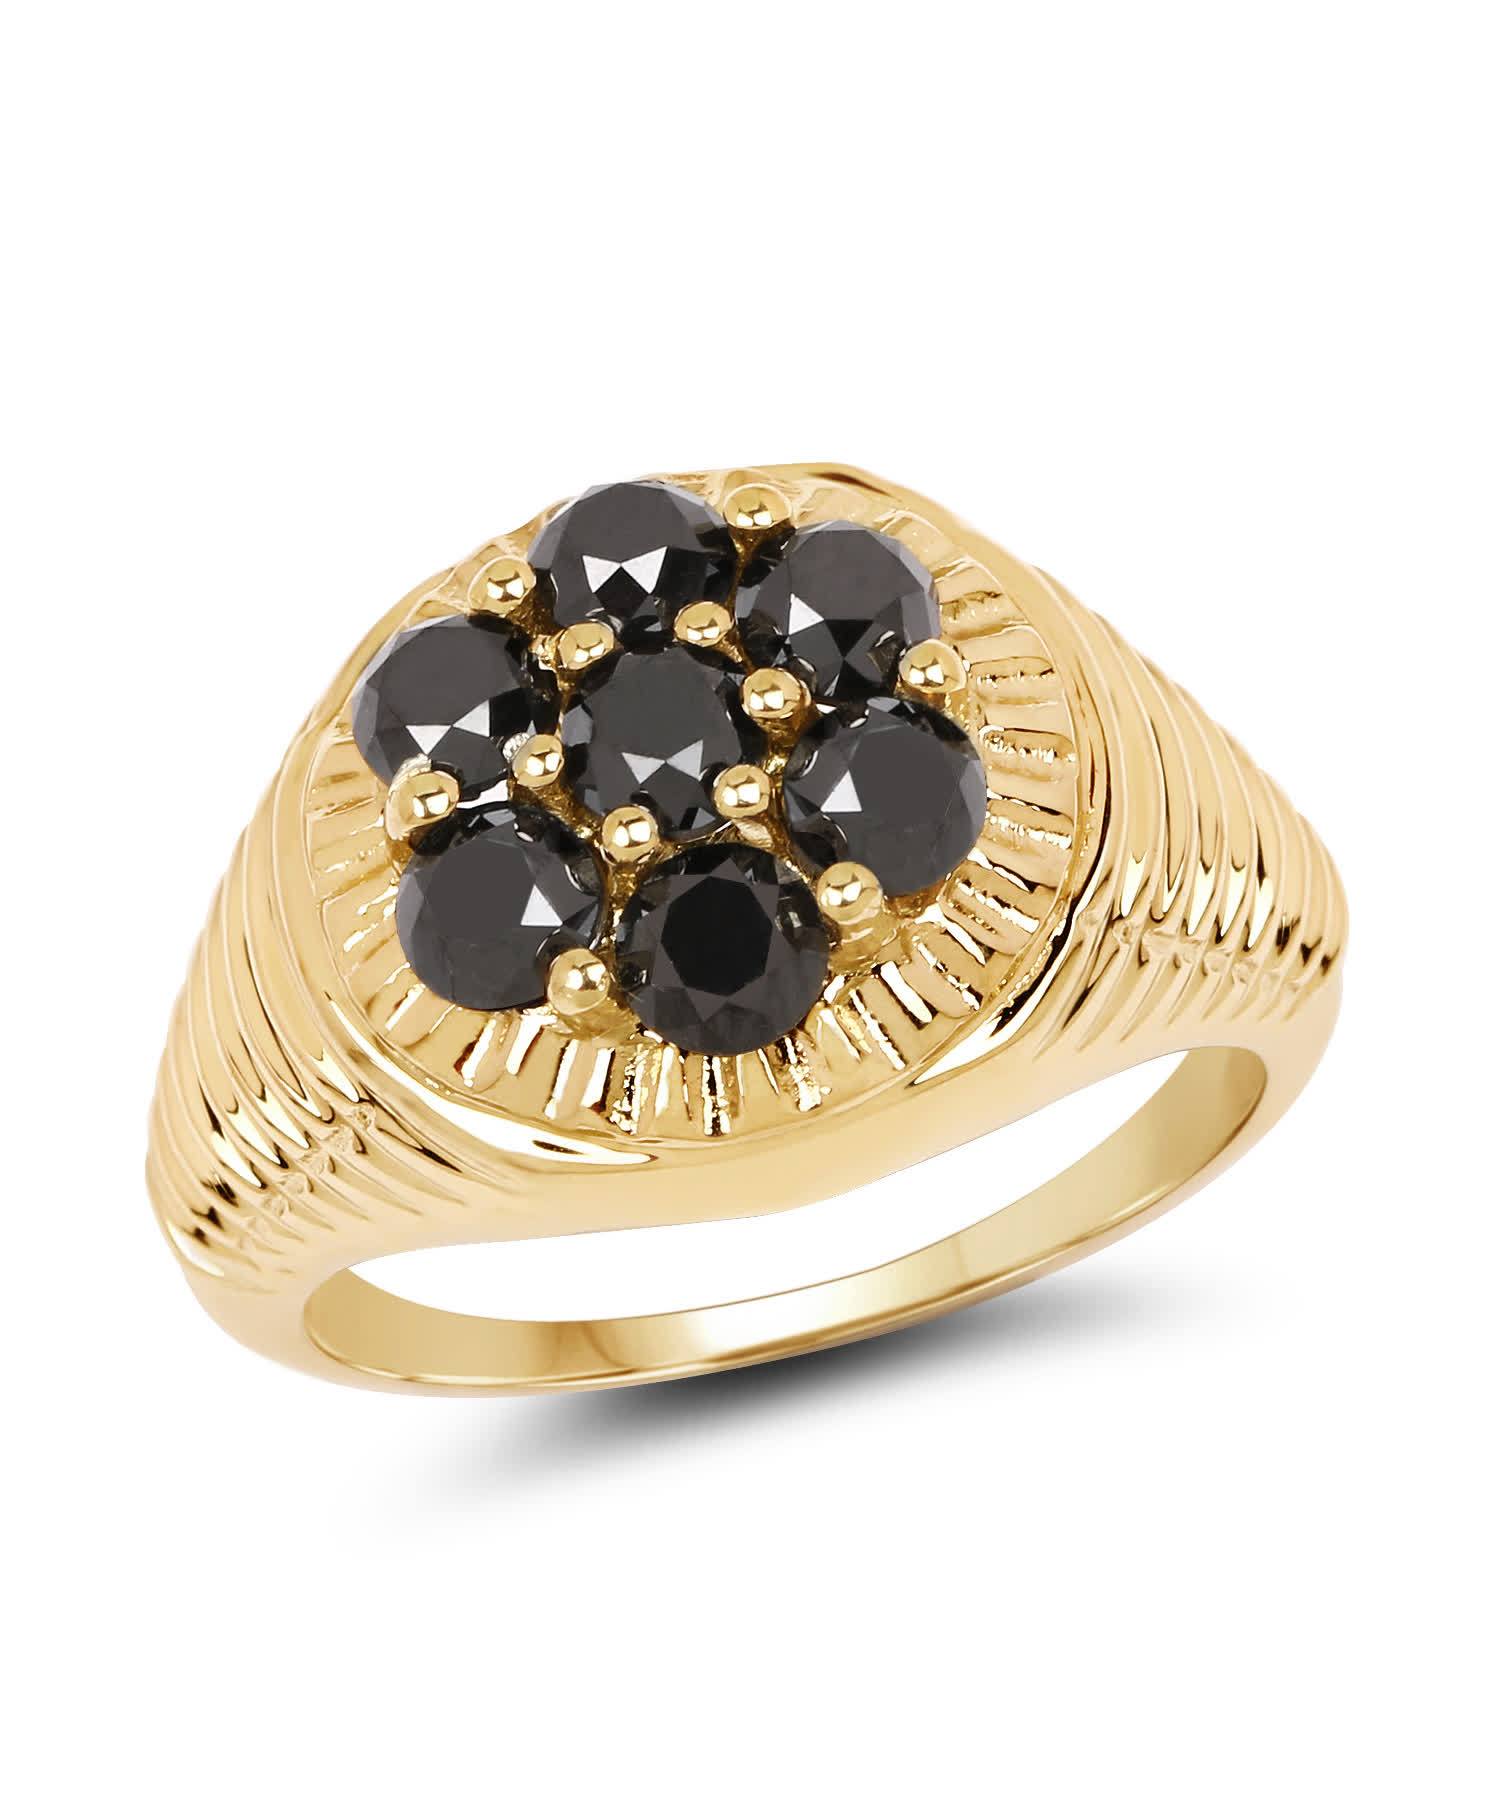 1.40ctw Black Diamond 14k Gold Plated 925 Sterling Silver Ring View 1